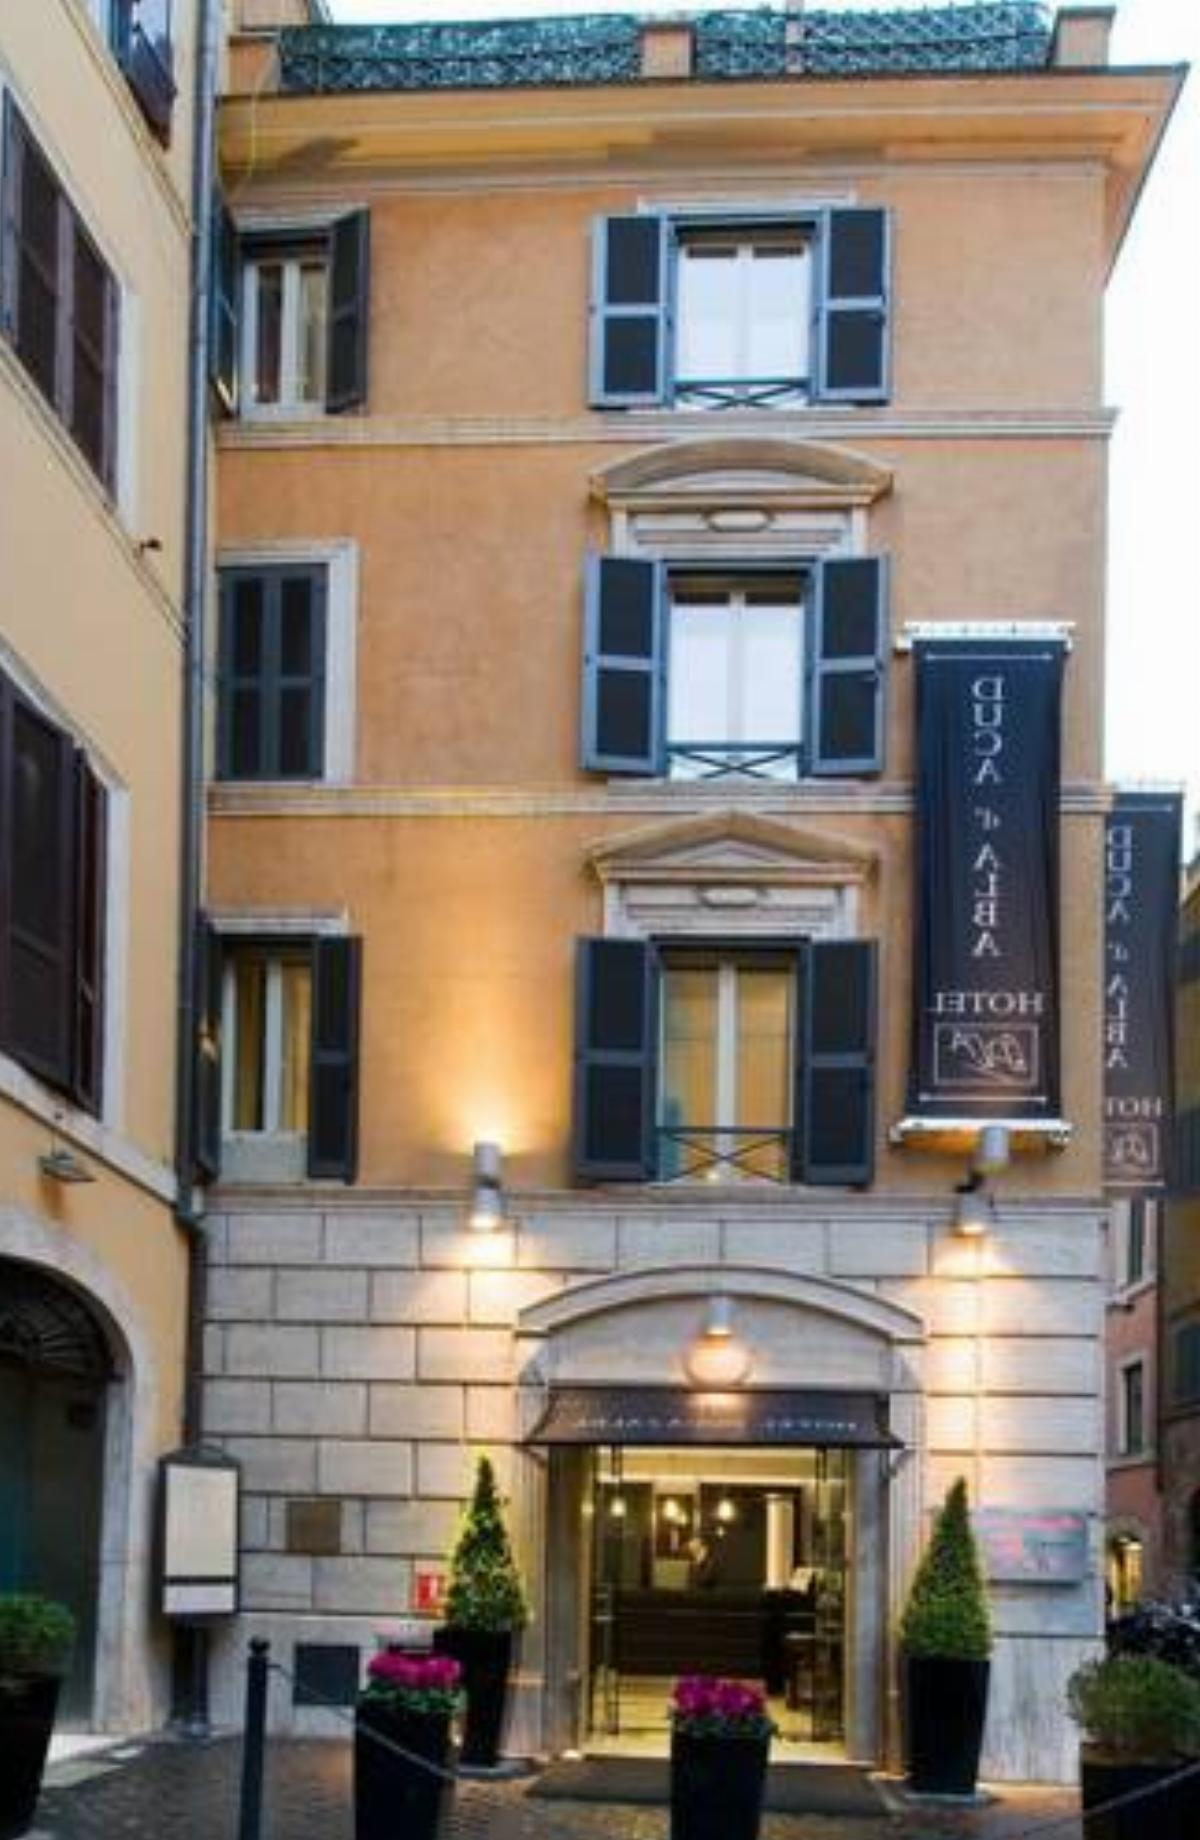 Duca d'Alba Hotel - Chateaux & Hotels Collection Hotel Roma Italy